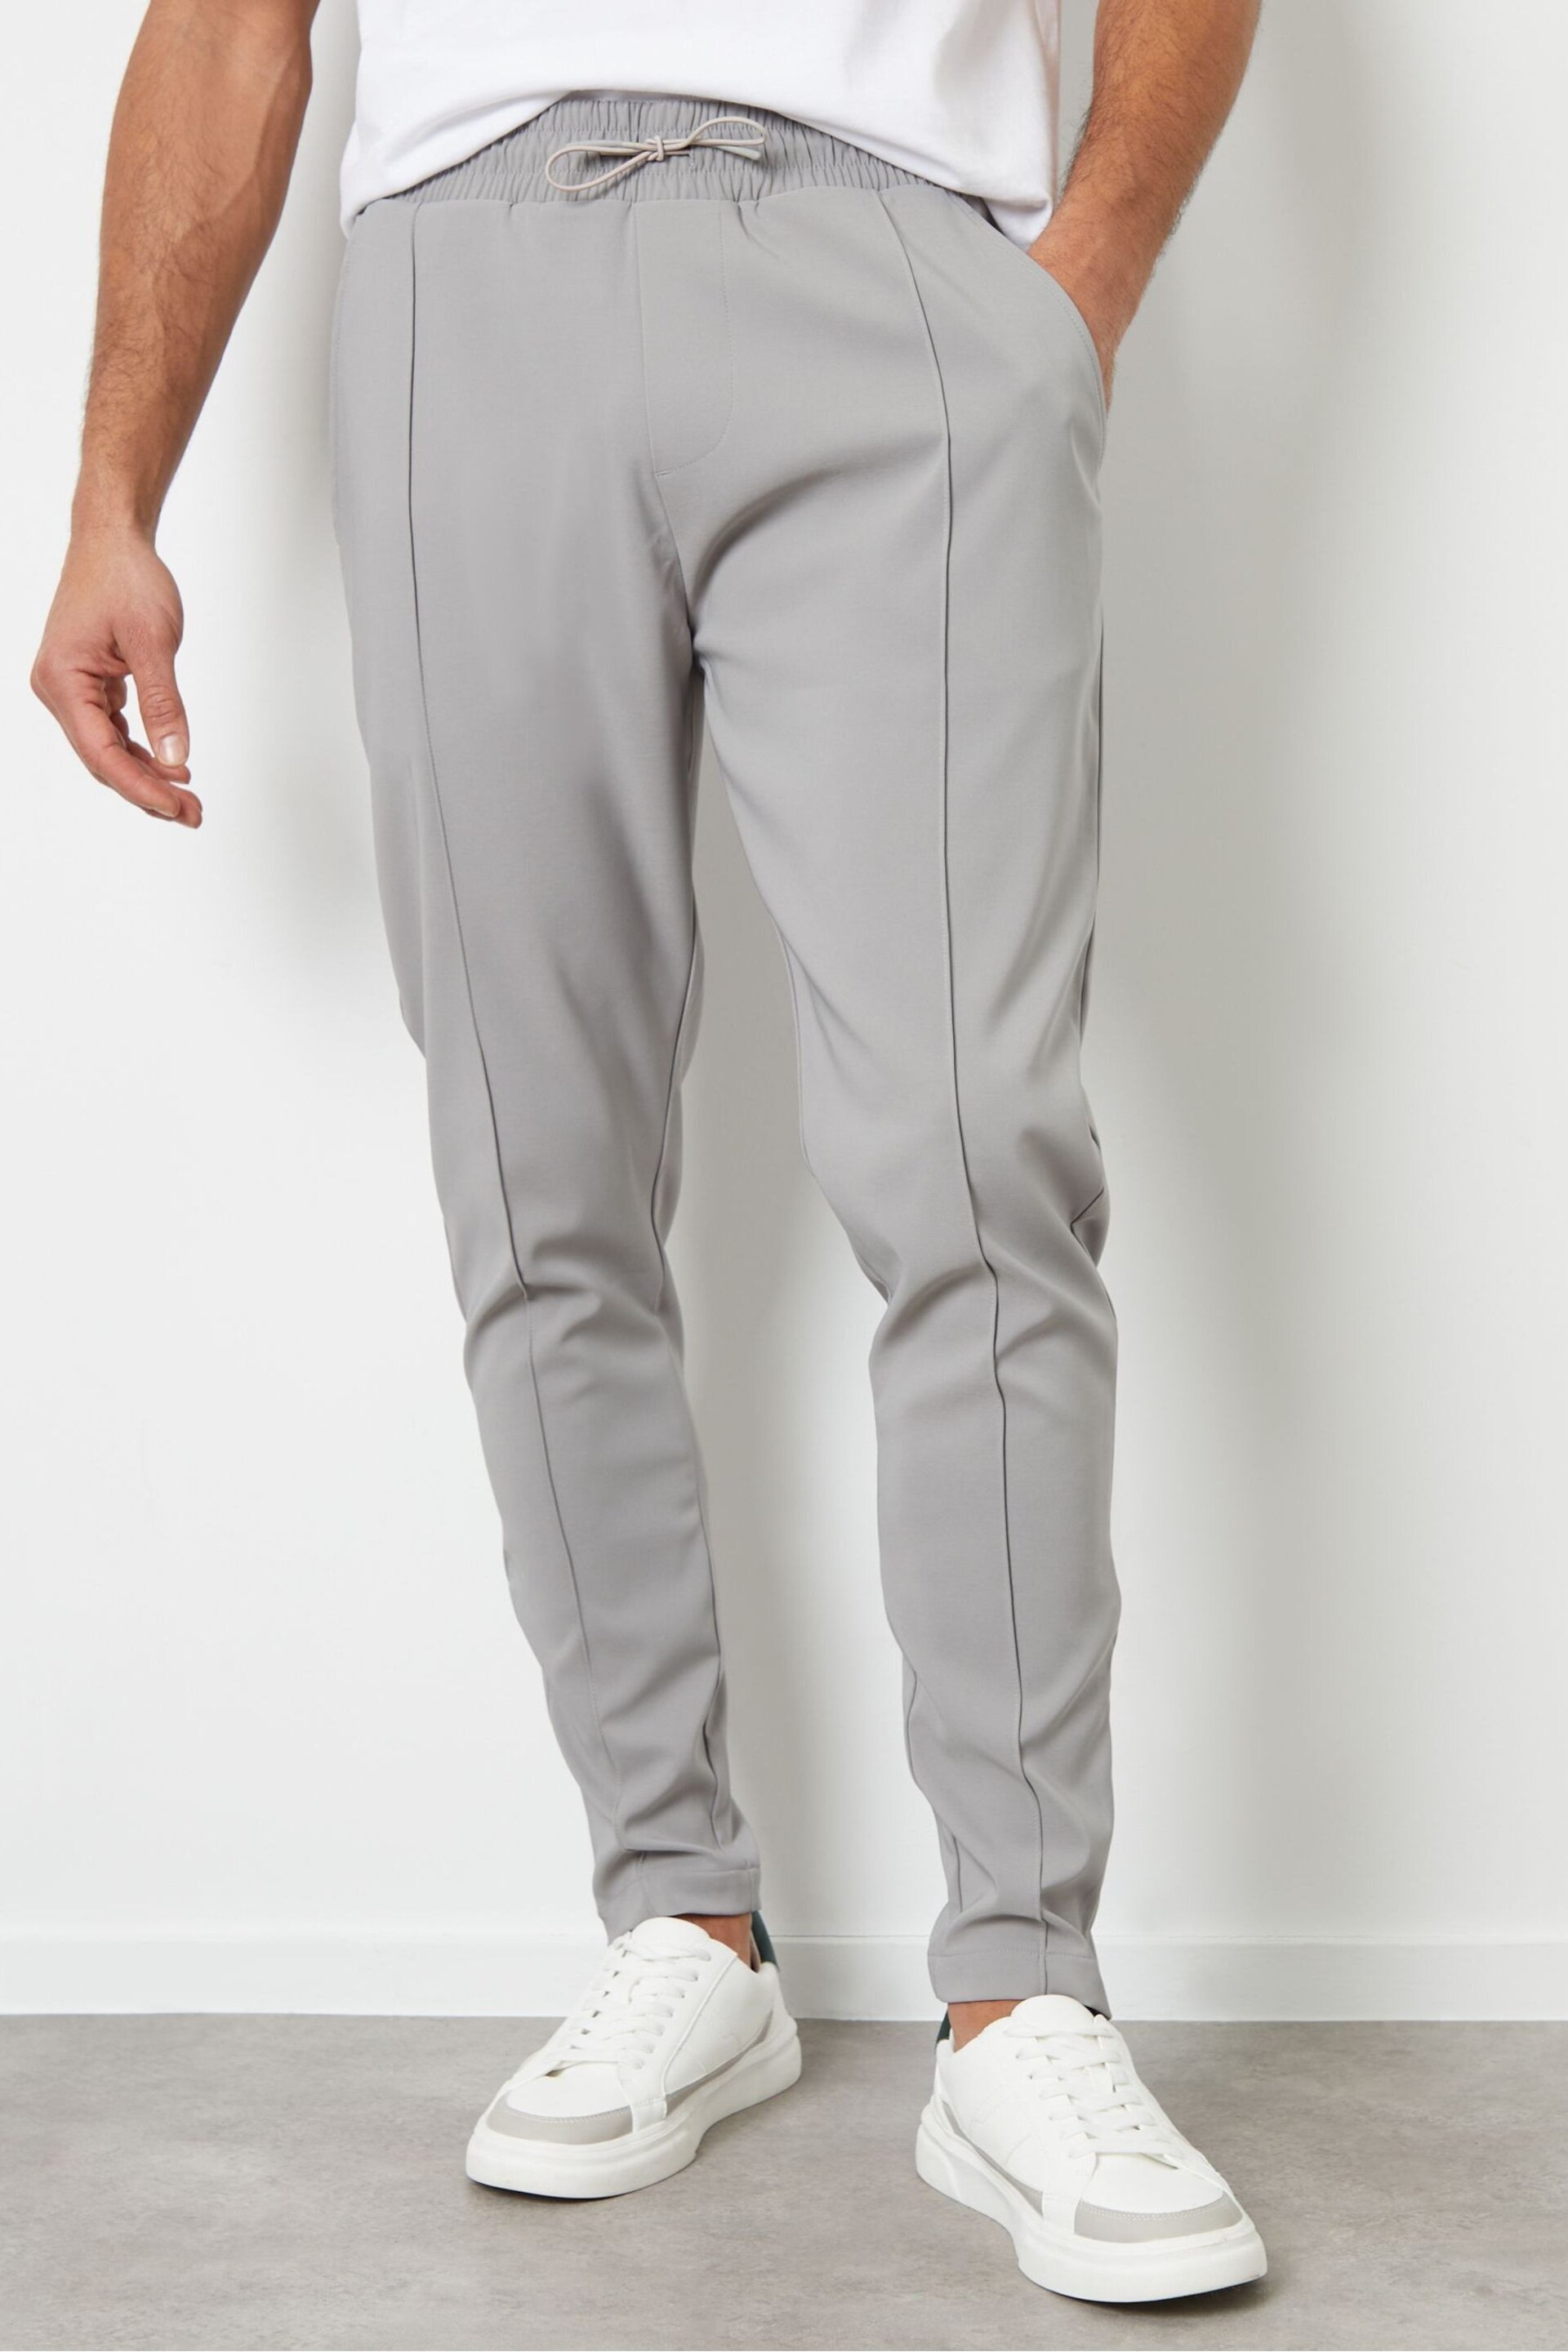 Threadbare Grey Luxe Pull-On Seam Detail Stretch Trousers - Image 1 of 4